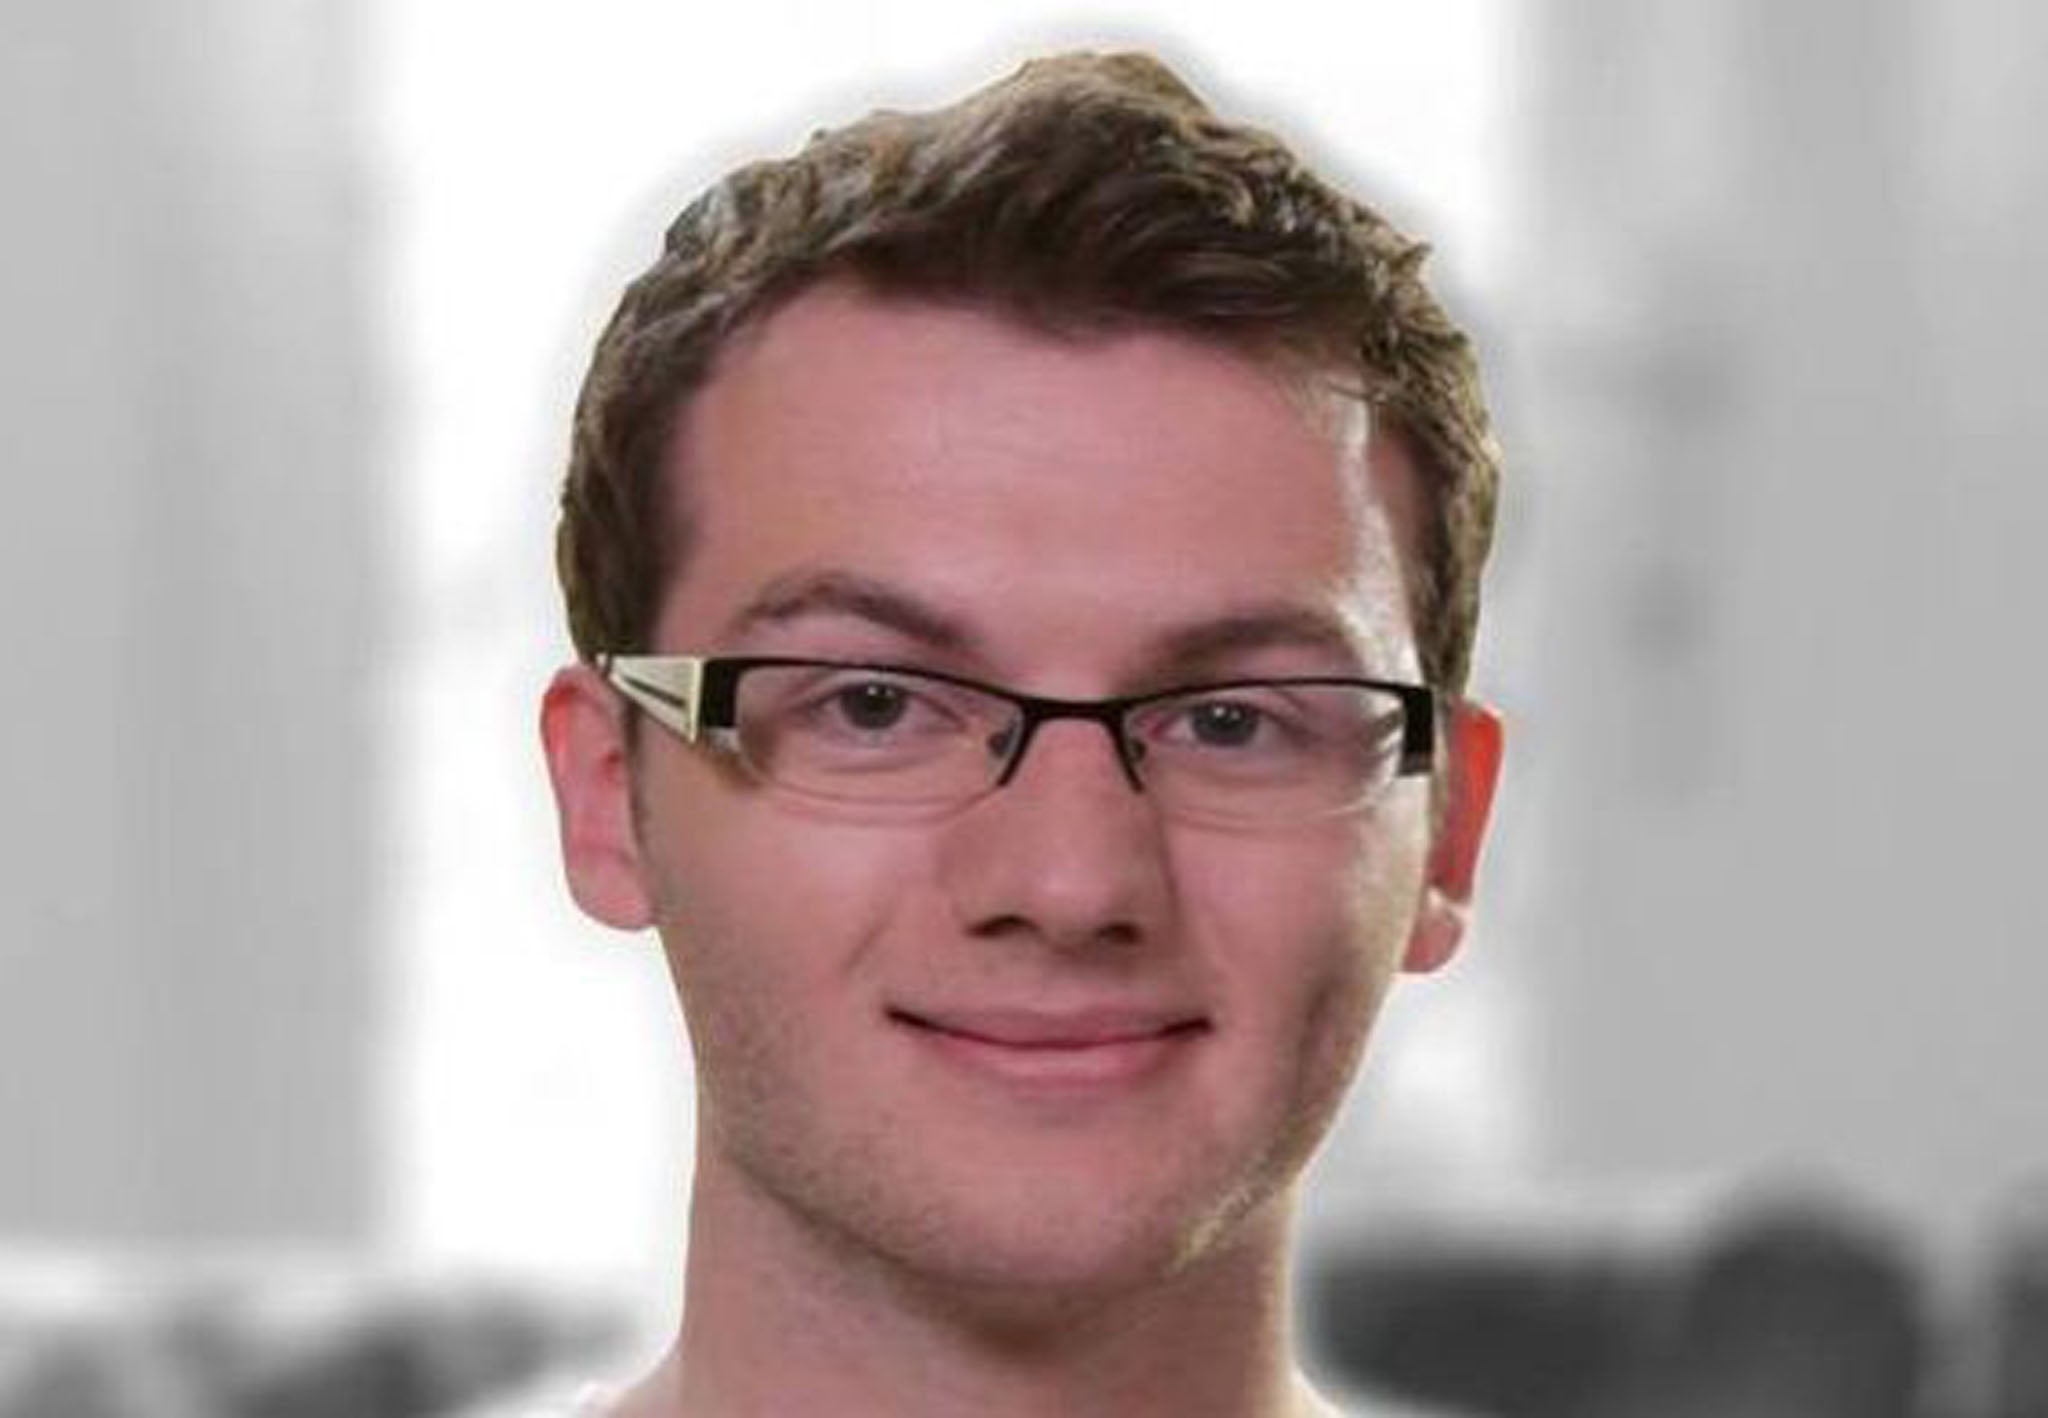 Stephen Sutton, who has died of cancer